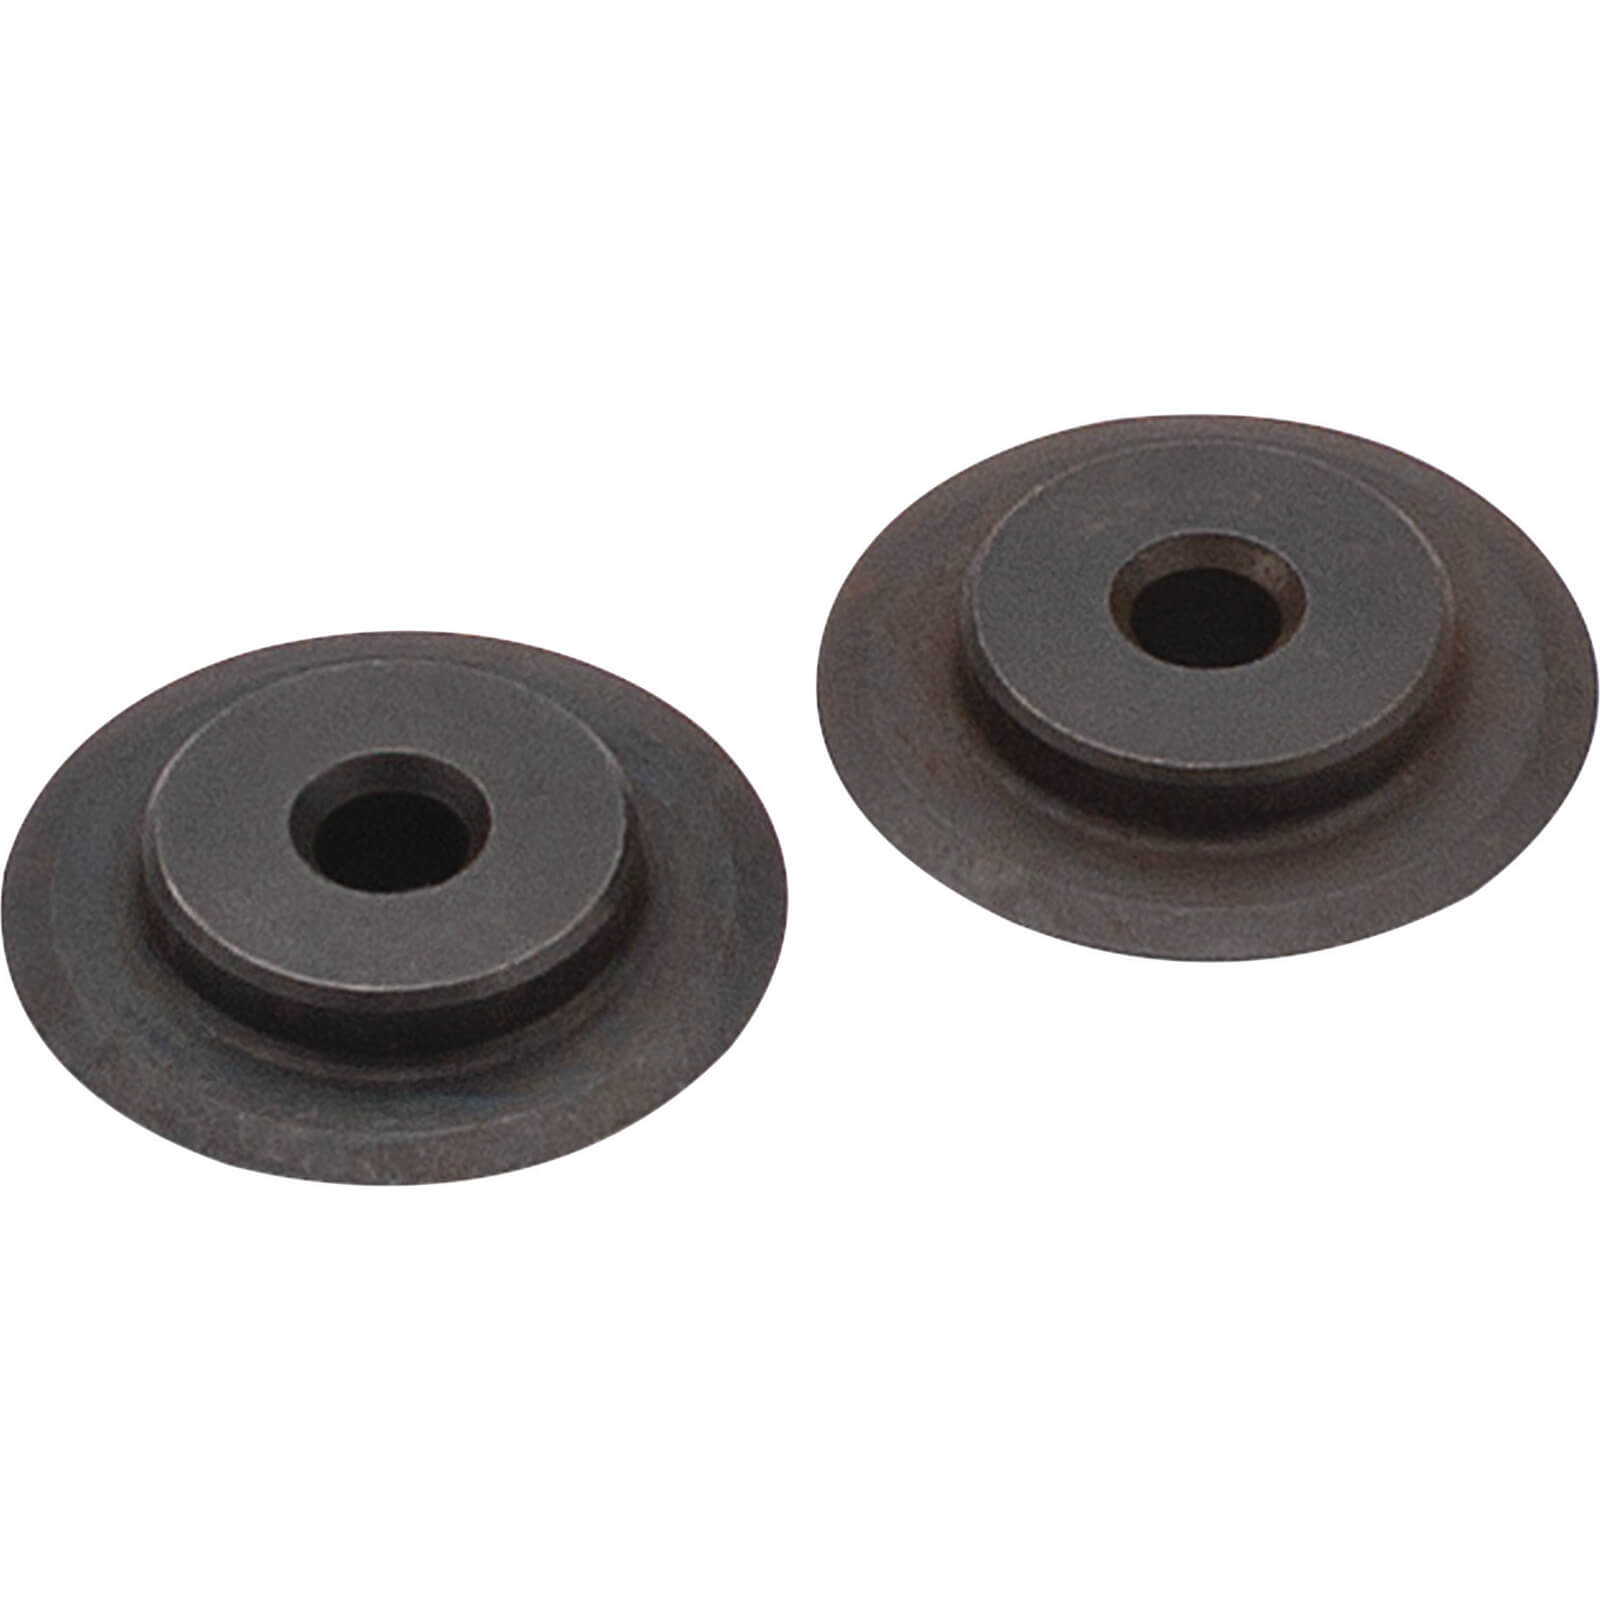 Photo of Draper Replacement Wheel For 81078 And 81095 Ratchet Pipe Cutters